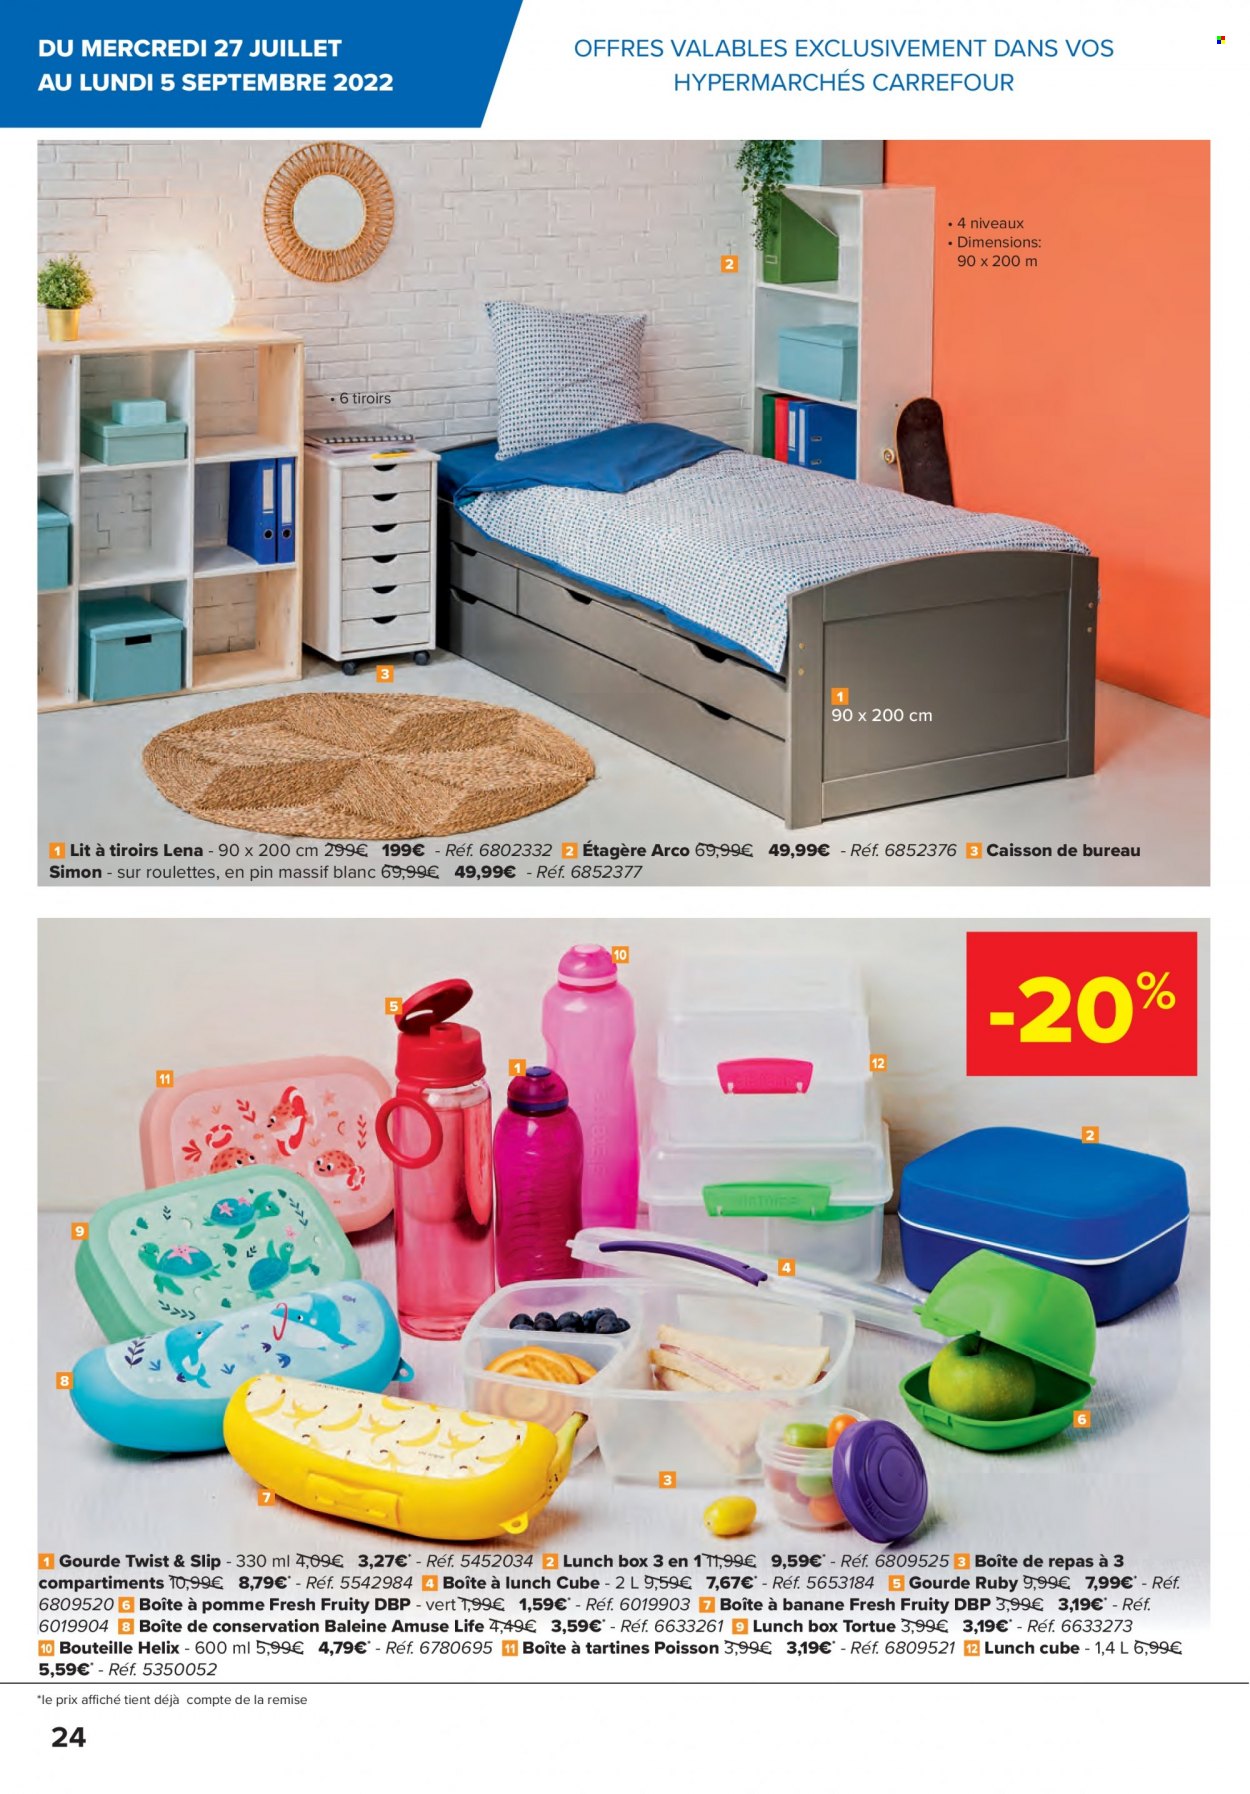 Catalogue Carrefour hypermarkt - 27.7.2022 - 5.9.2022. Page 24.